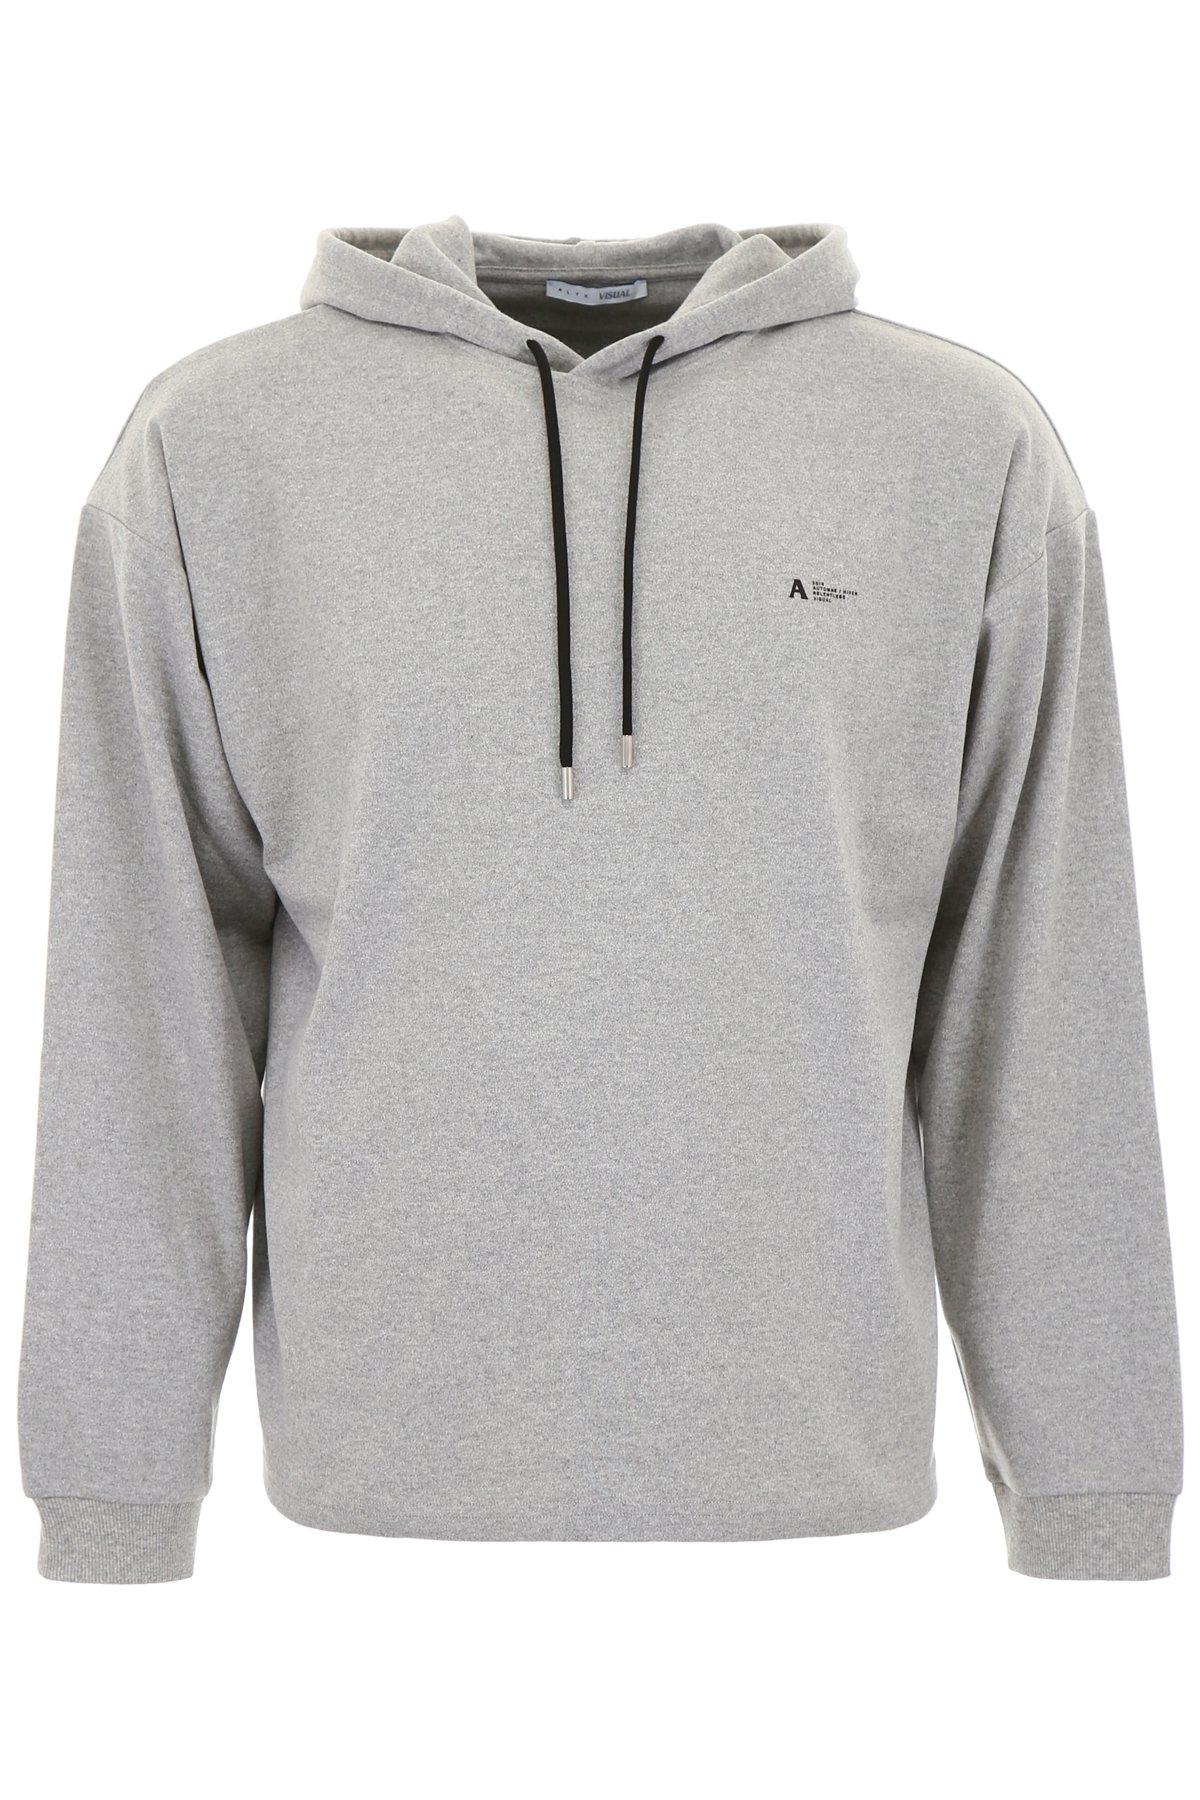 1017 ALYX 9SM Logo Printed Hoodie in Grey (Gray) for Men - Save 16% - Lyst